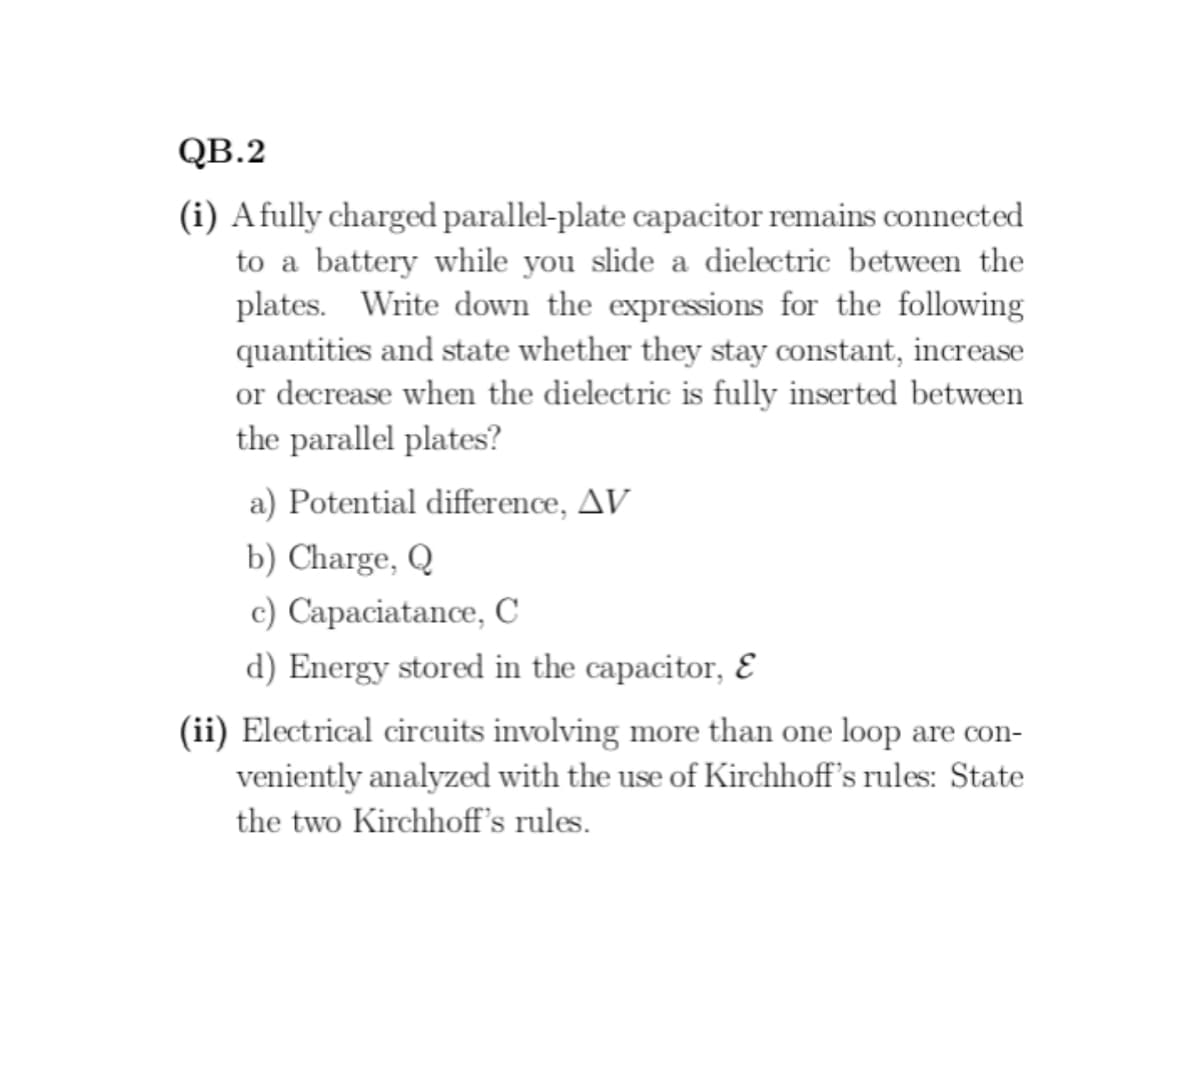 QB.2
(i) A fully charged parallel-plate capacitor remains connected
to a battery while you slide a dielectric between the
plates. Write down the expressions for the following
quantities and state whether they stay constant, increase
or decrease when the dielectric is fully inserted between
the parallel plates?
a) Potential difference, AV
b) Charge, Q
c) Capaciatance, C
d) Energy stored in the capacitor, &
(ii) Electrical circuits involving more than one loop are con-
veniently analyzed with the use of Kirchhoff's rules: State
the two Kirchhoff's rules.